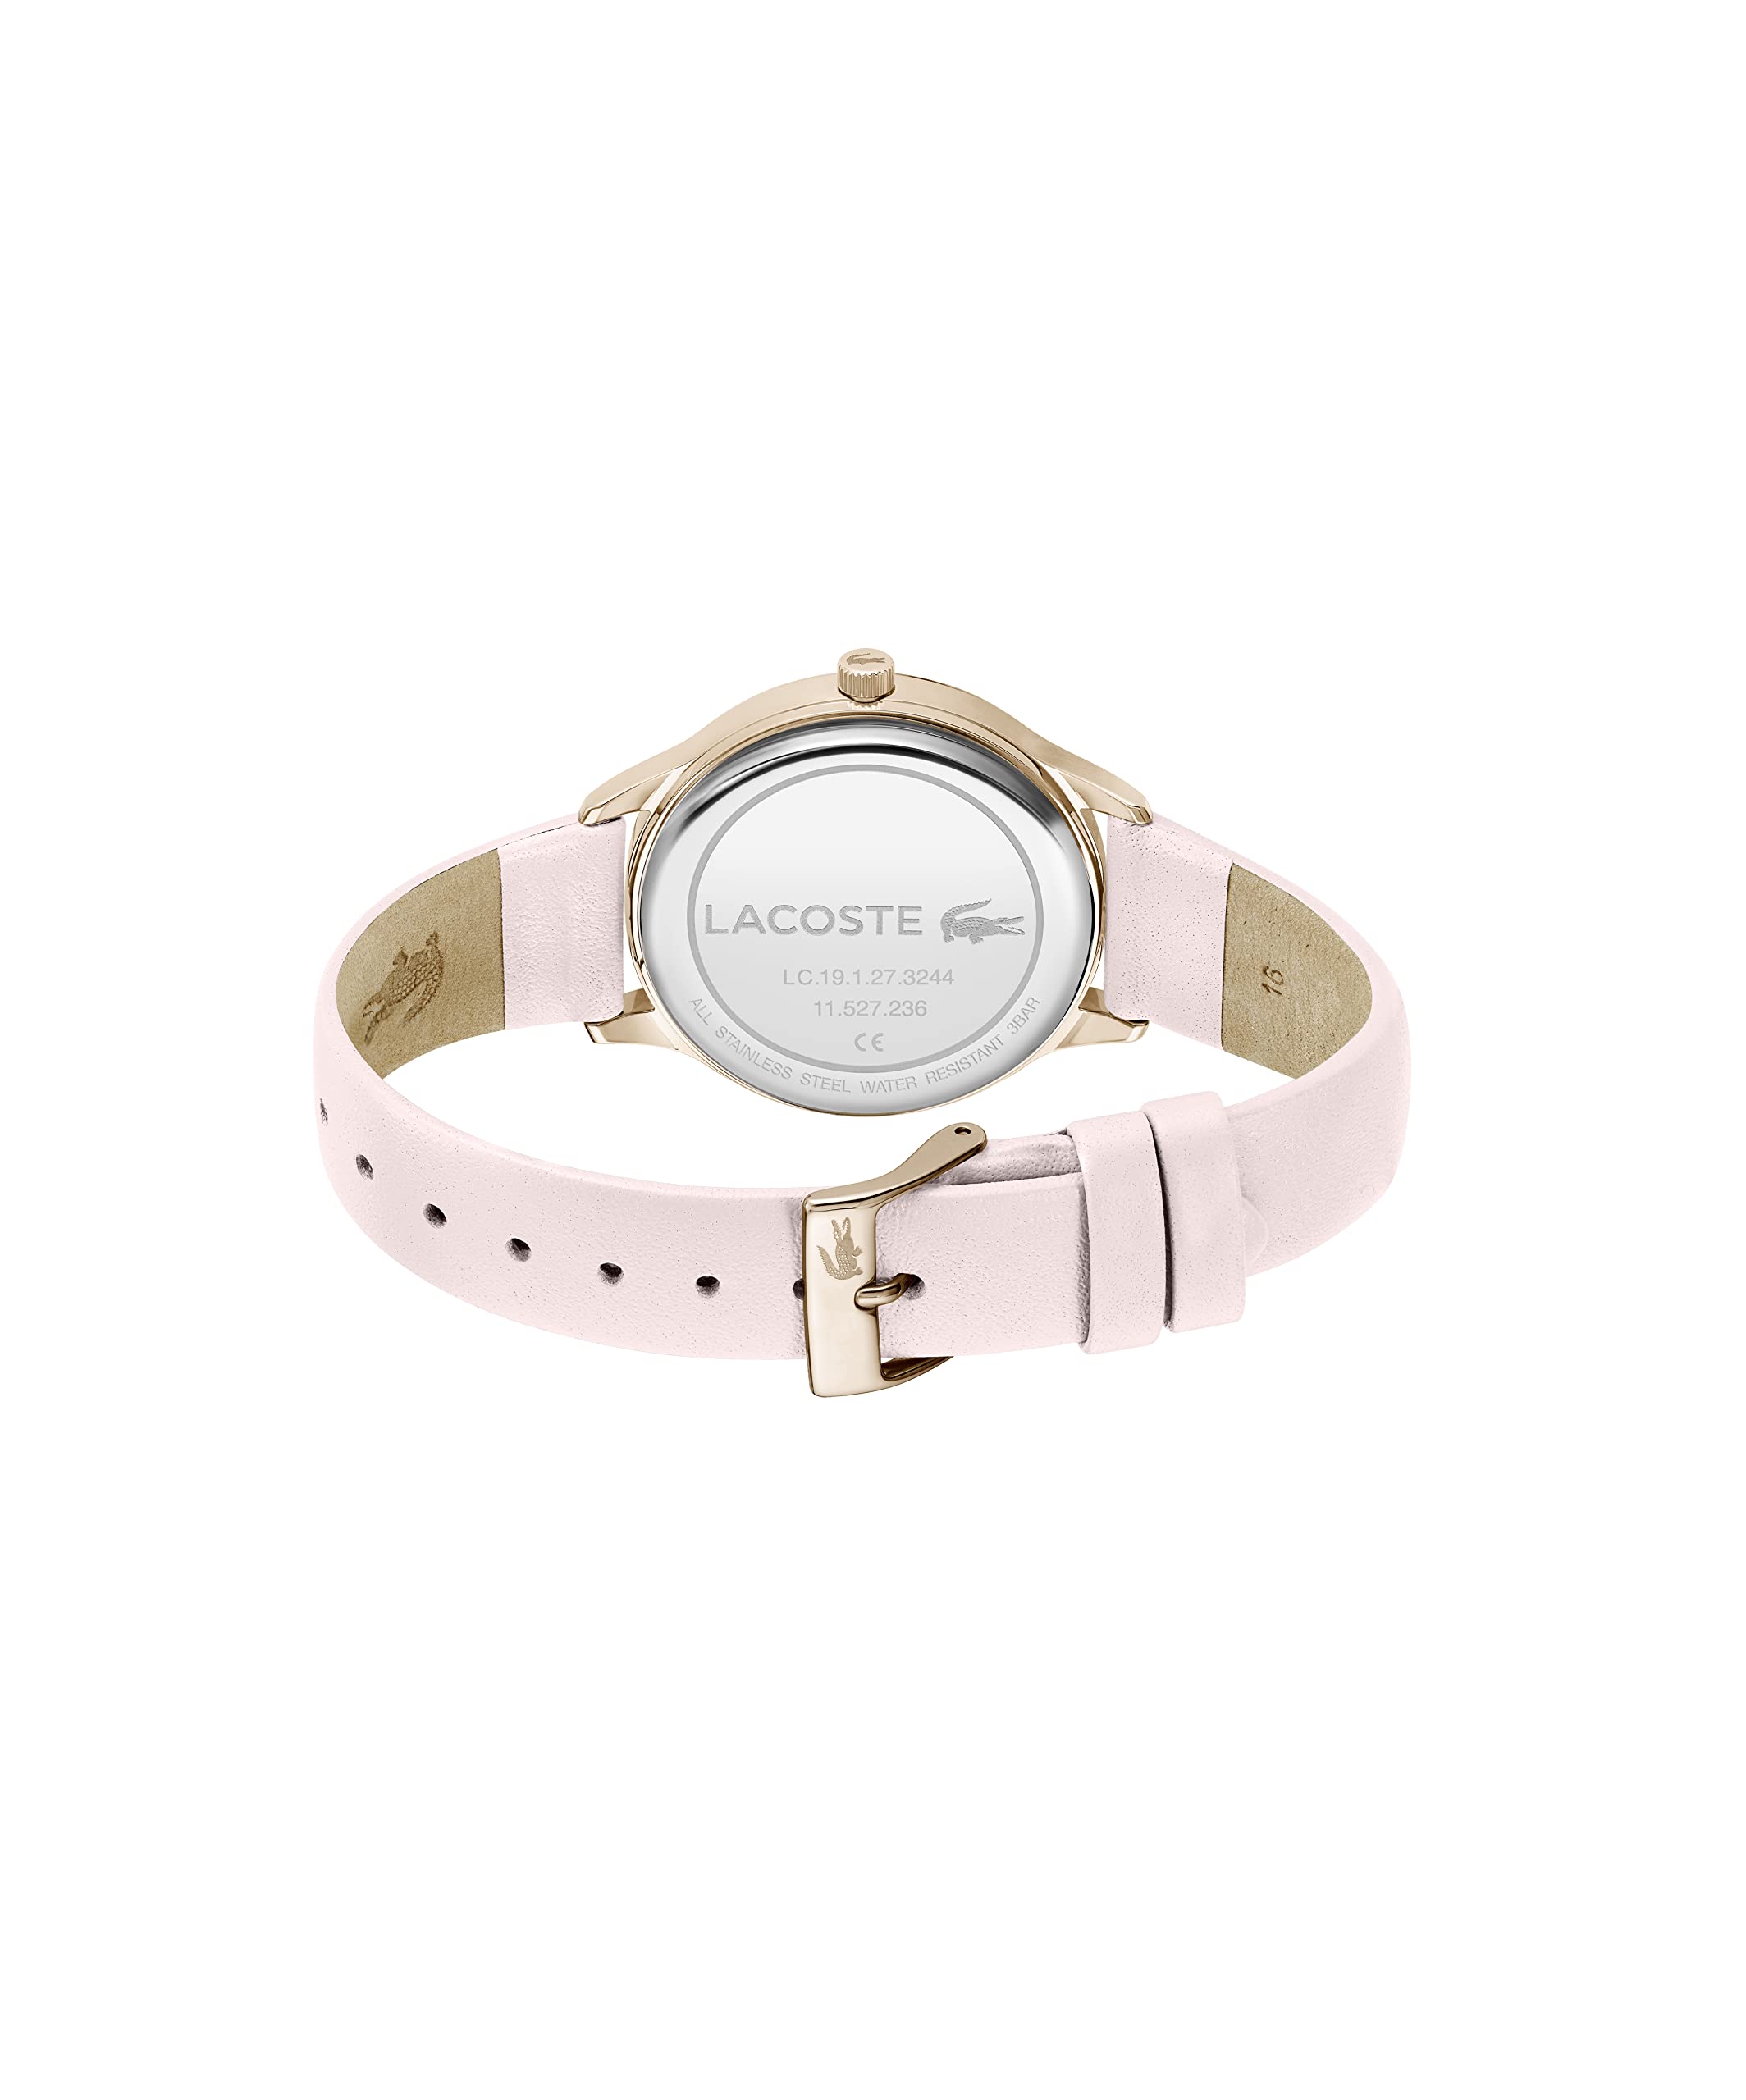 Lacoste Club Women's Quartz Stainless Steel and Leather Strap Watch, Color: Pink (Model: 2001258)